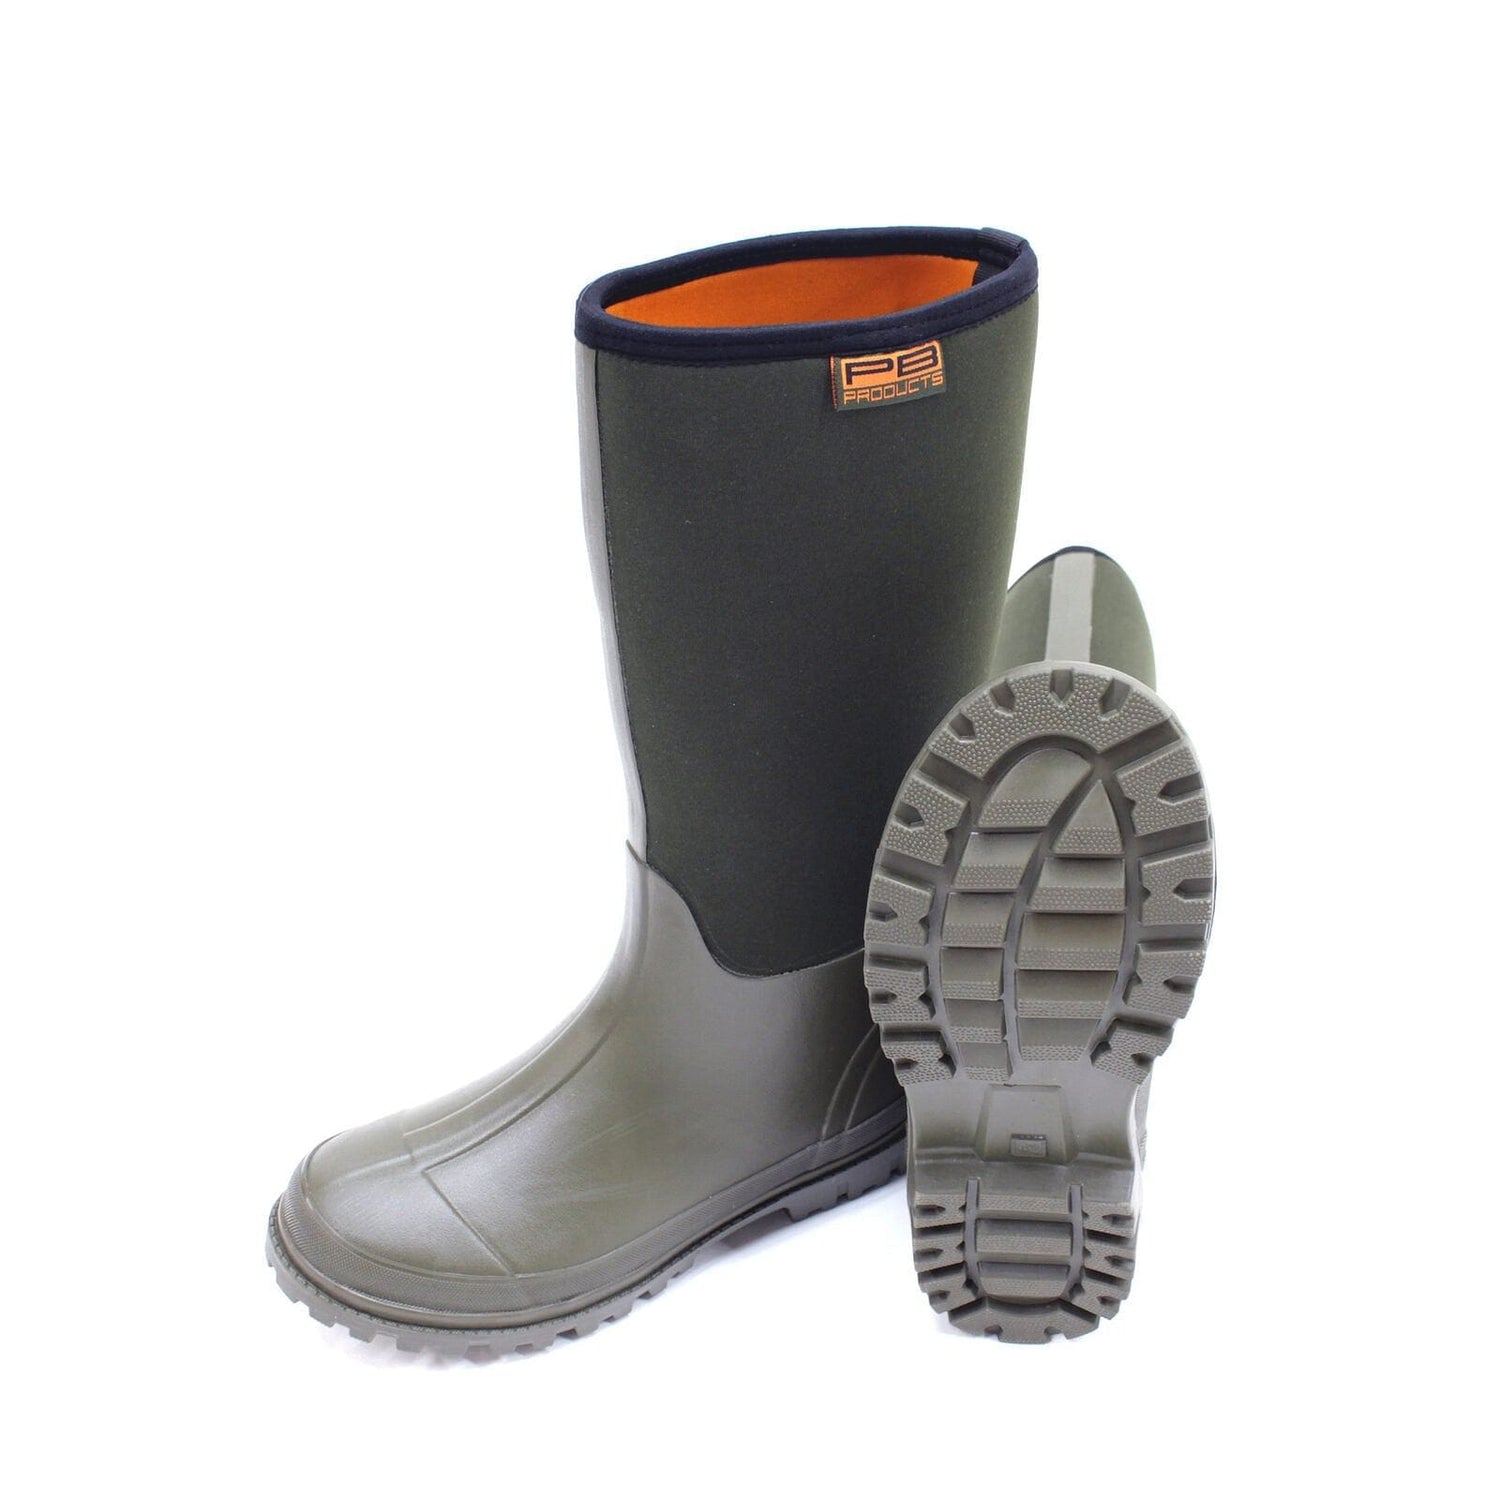 PB Products Neoprene Boots 6mm 43